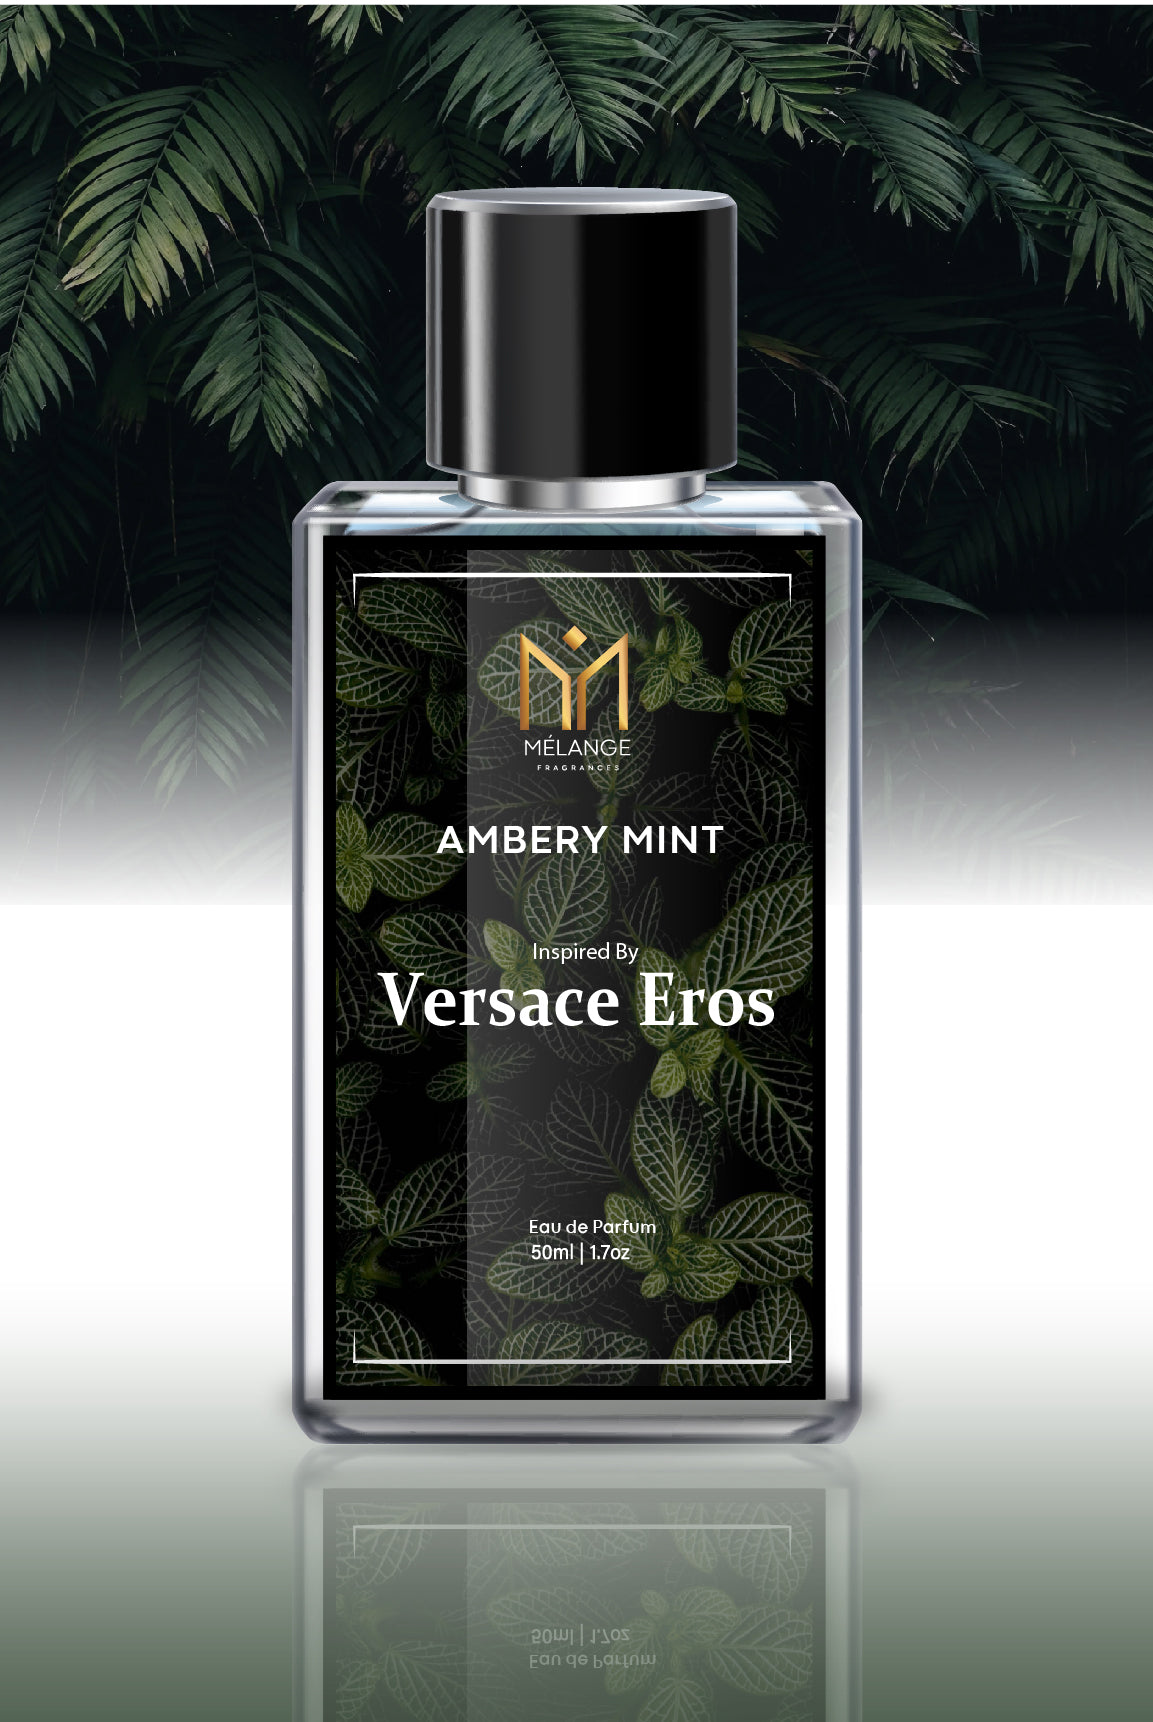 AMBERY MINT- Inspired By Versace Eros